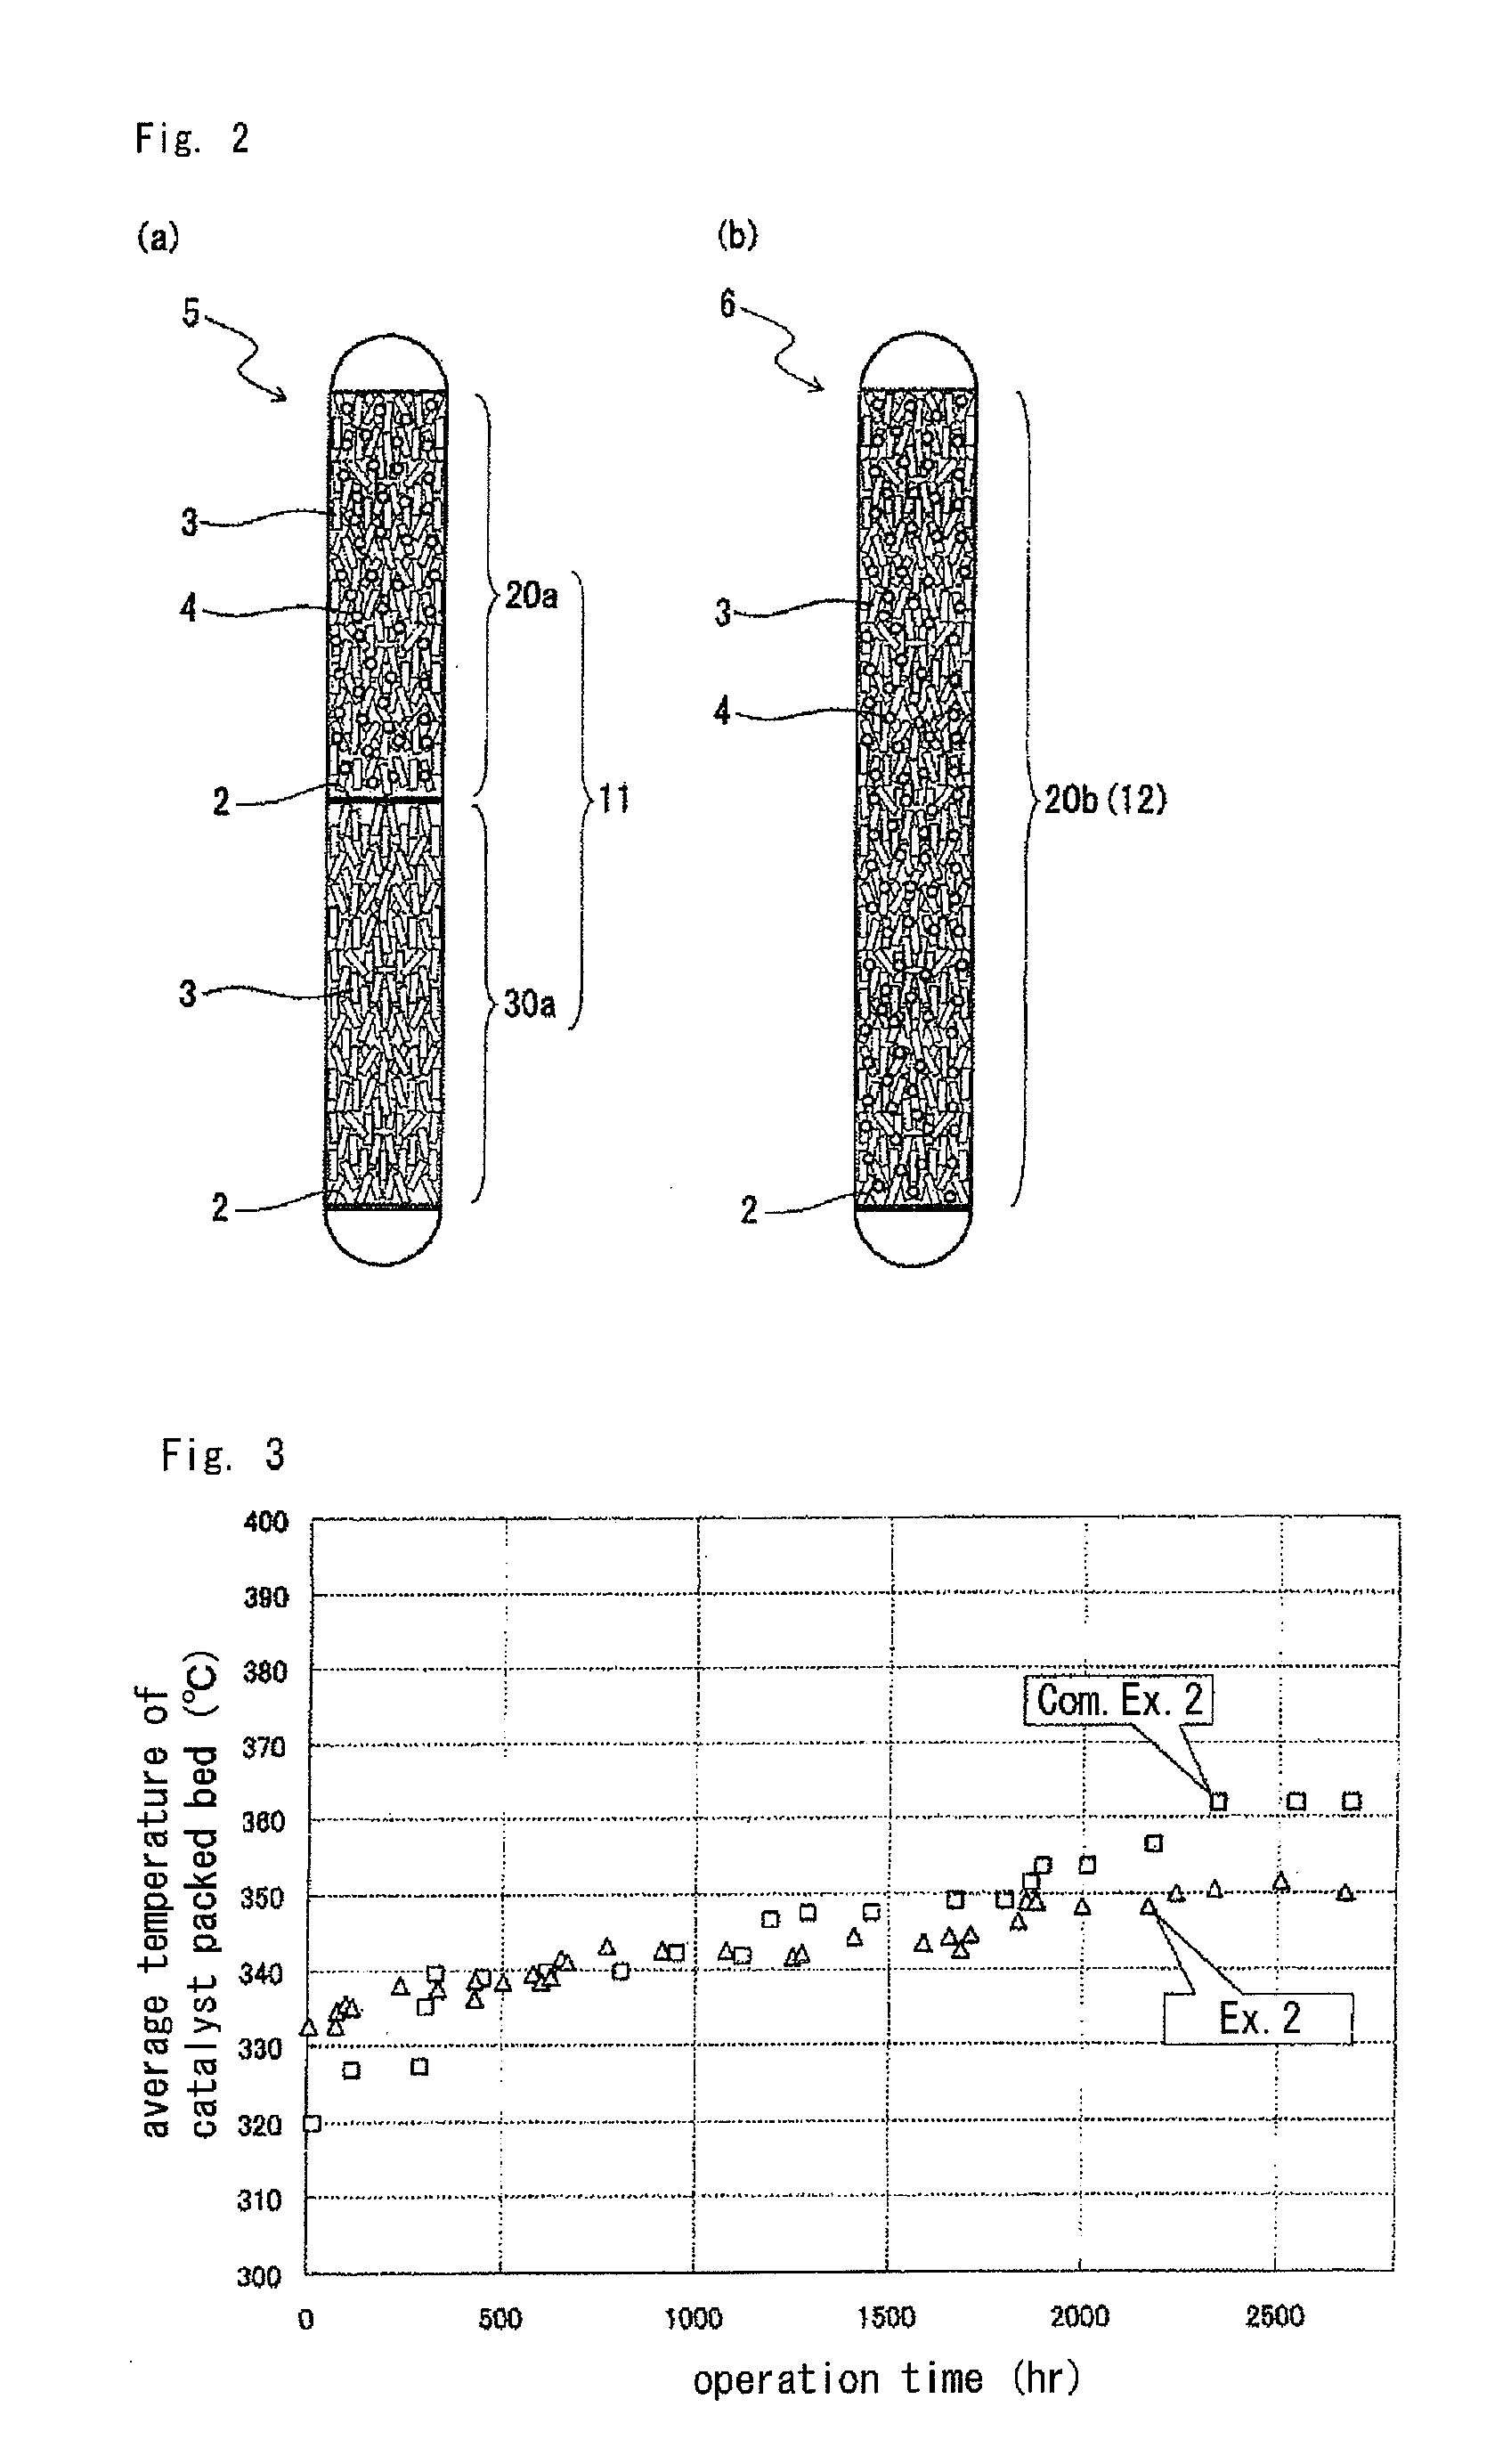 Process for producing chlorine